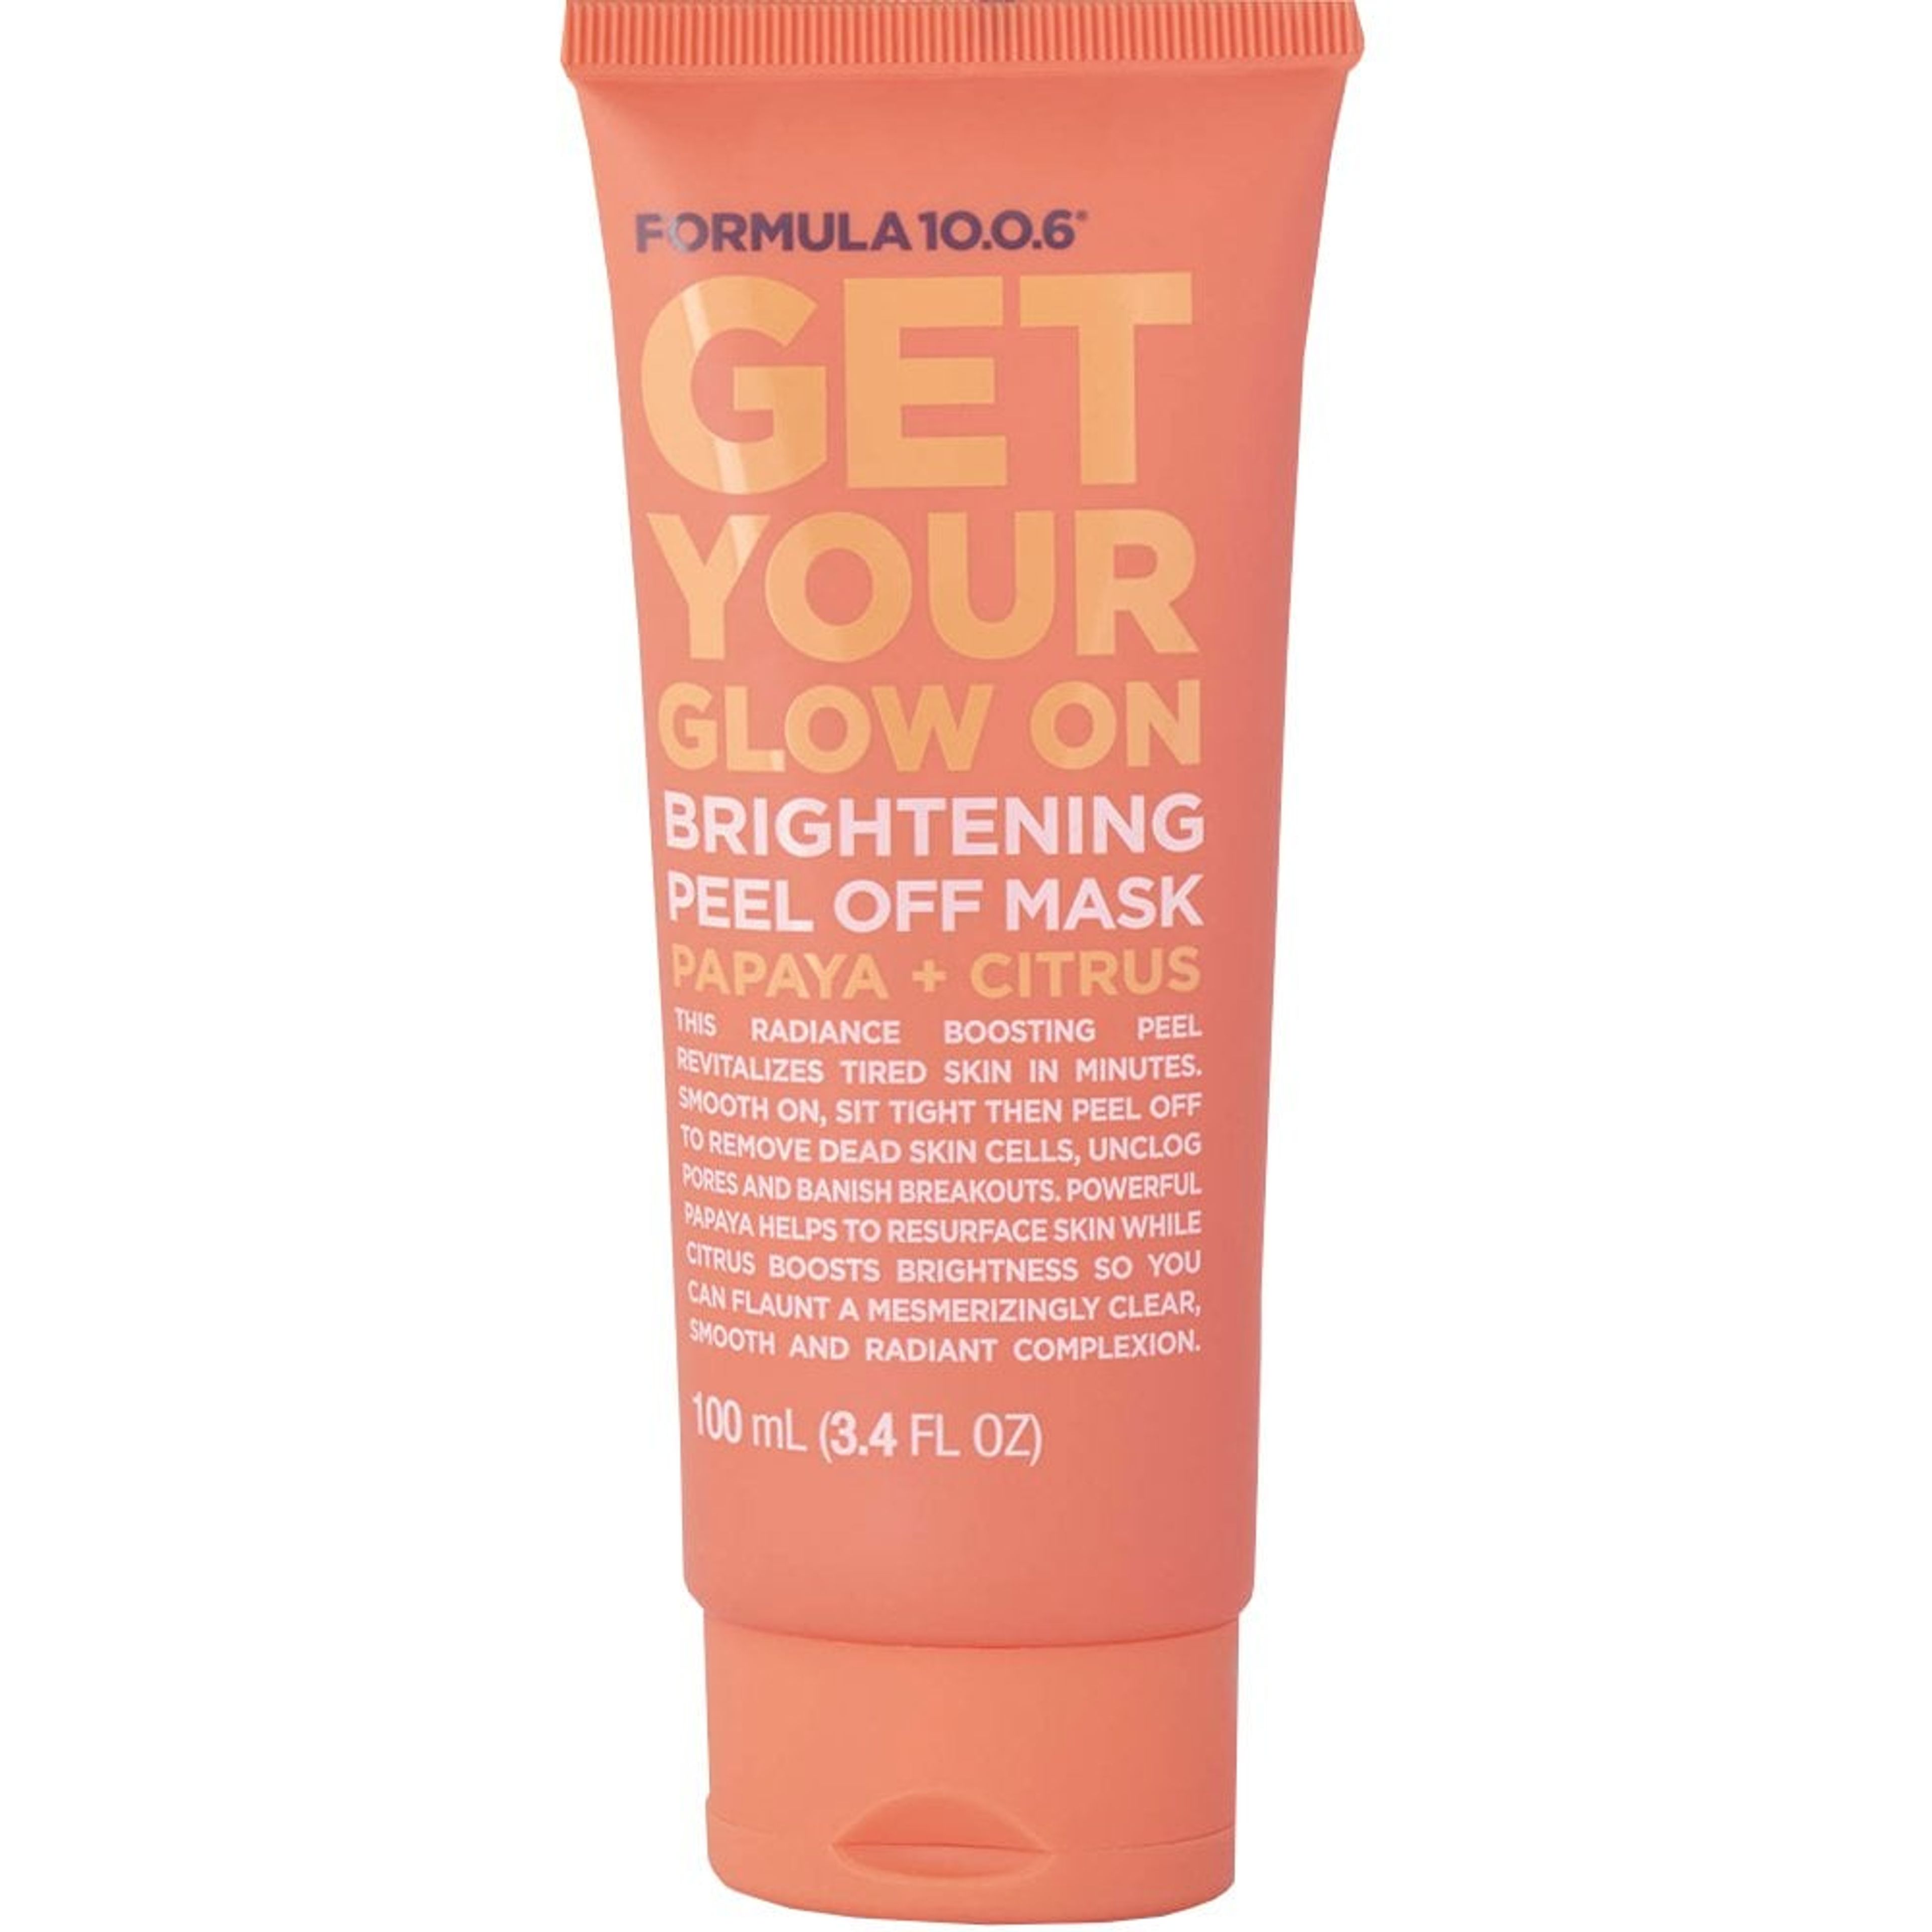  Get Your Glow On Brightening Peel Off Mask